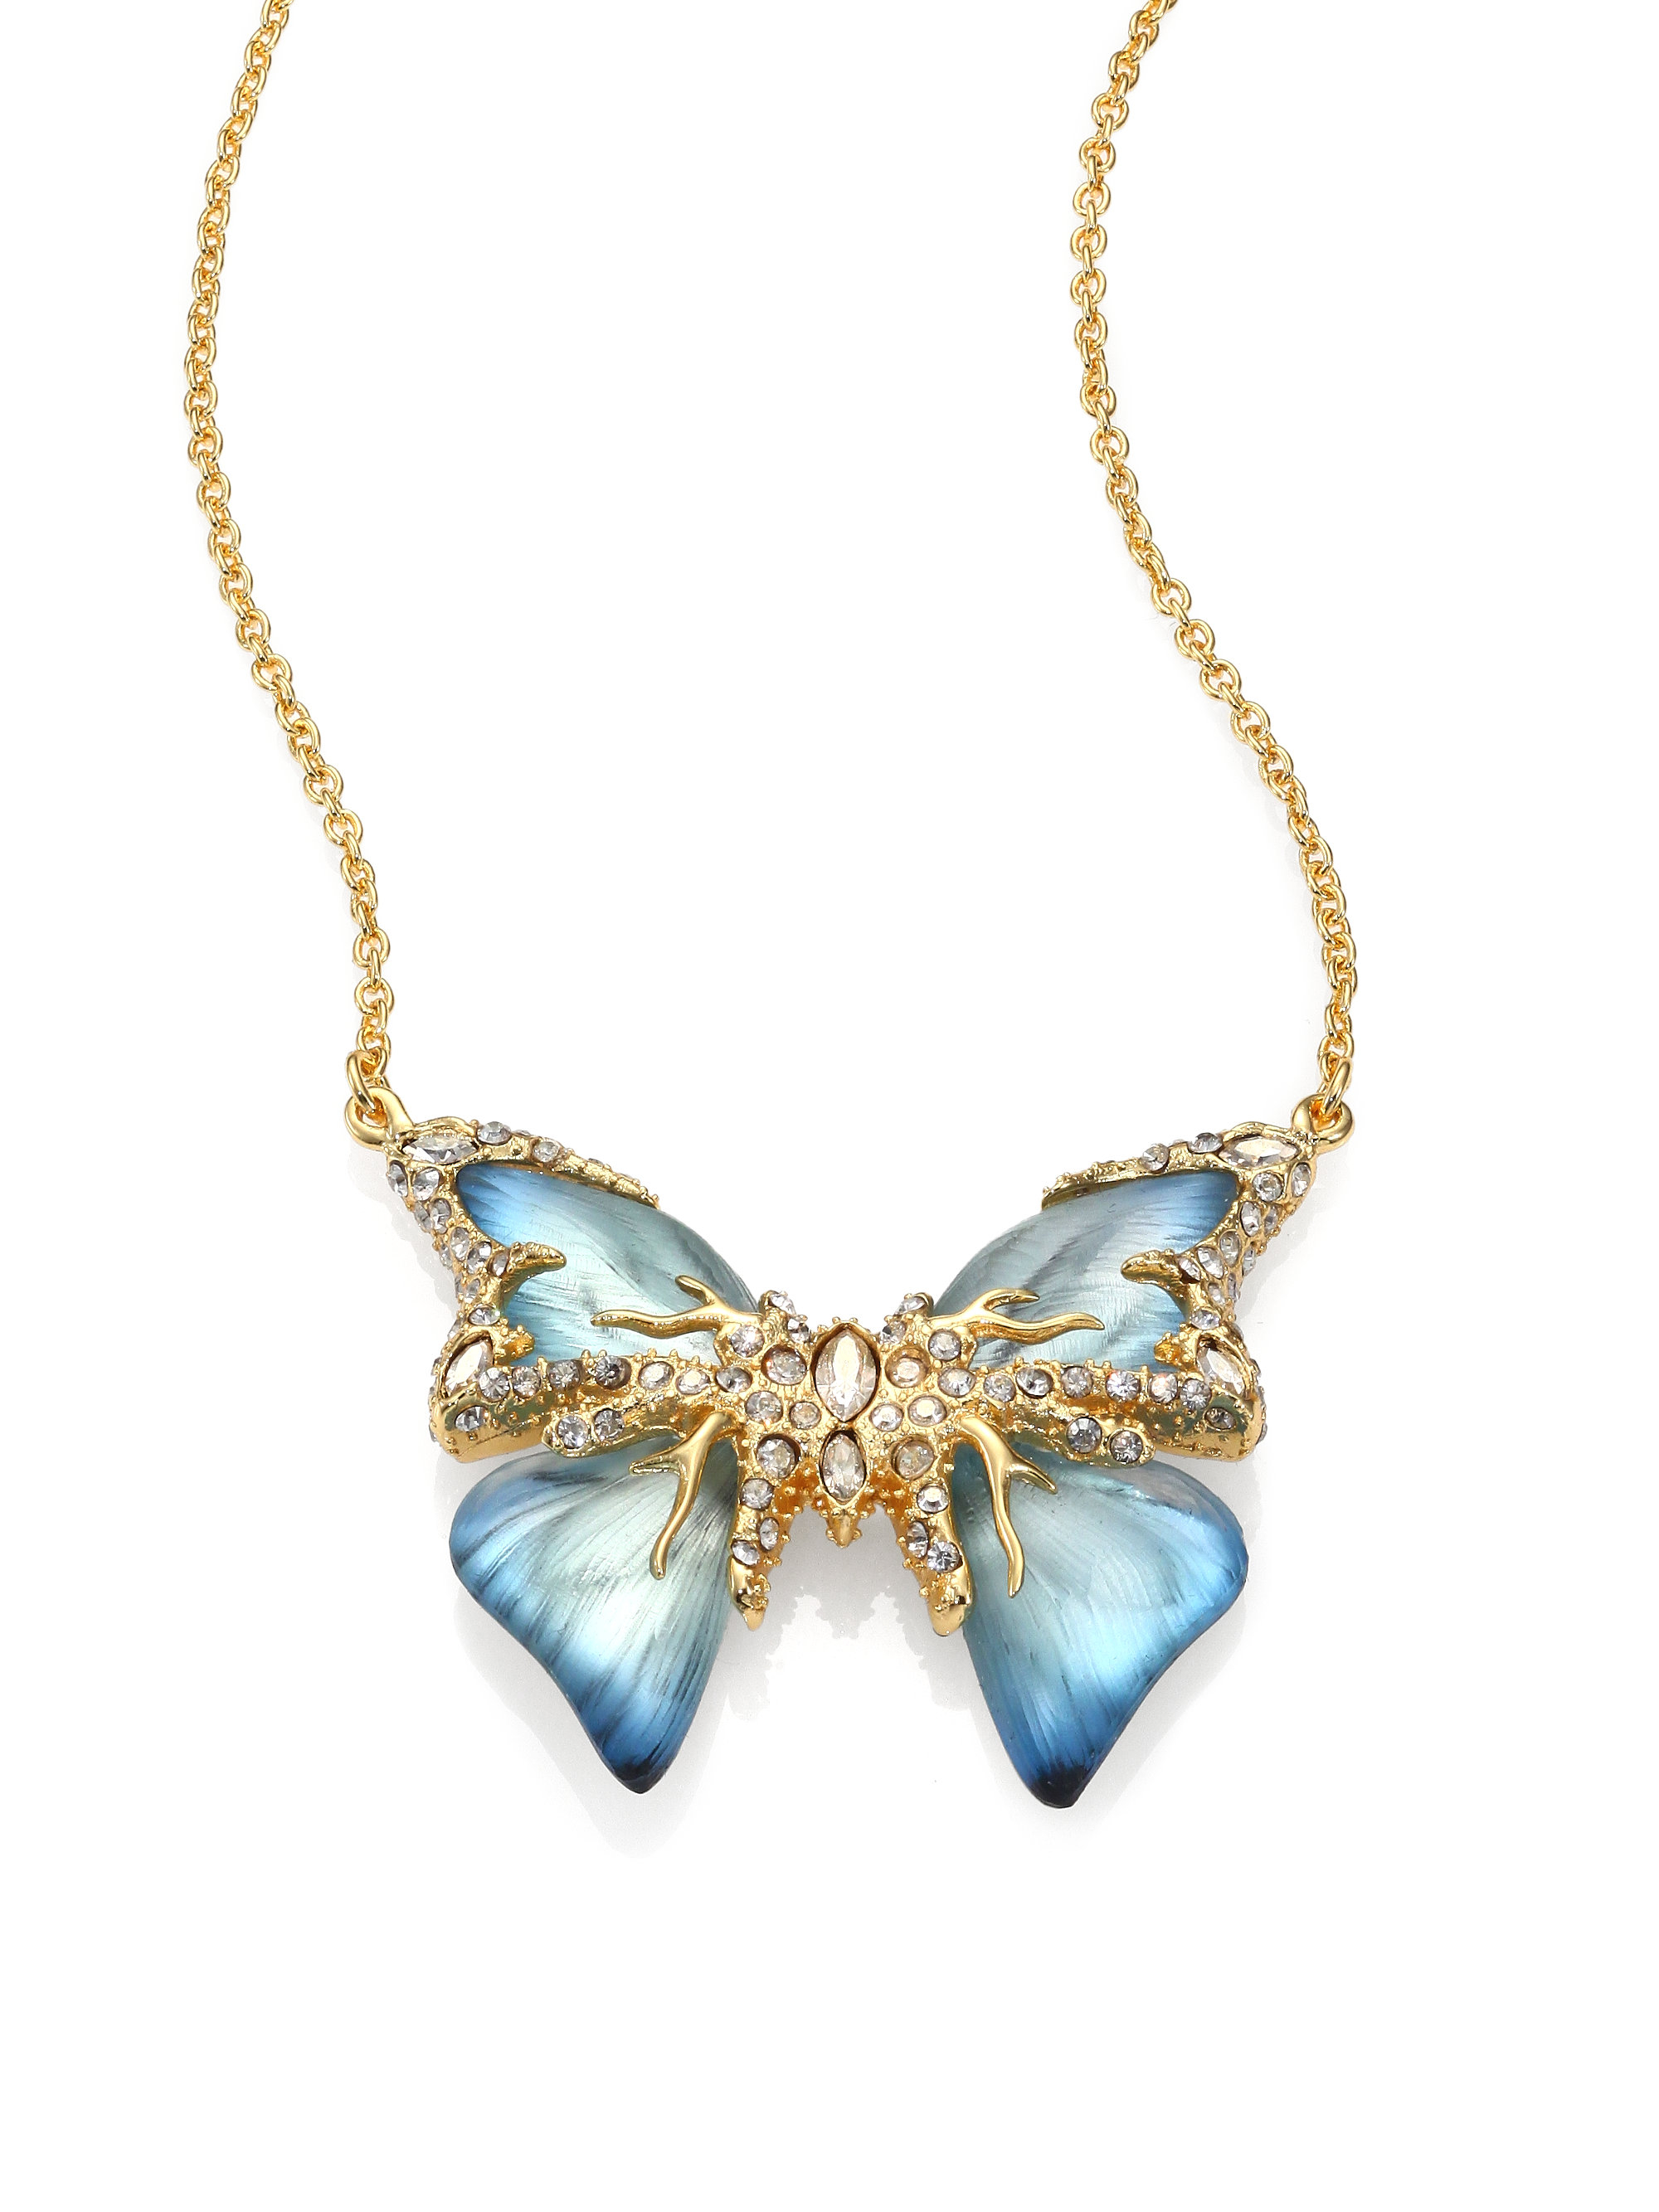 Alexis Bittar Swarovski Crystal Lucite Butterfly Pendant Necklace in ...